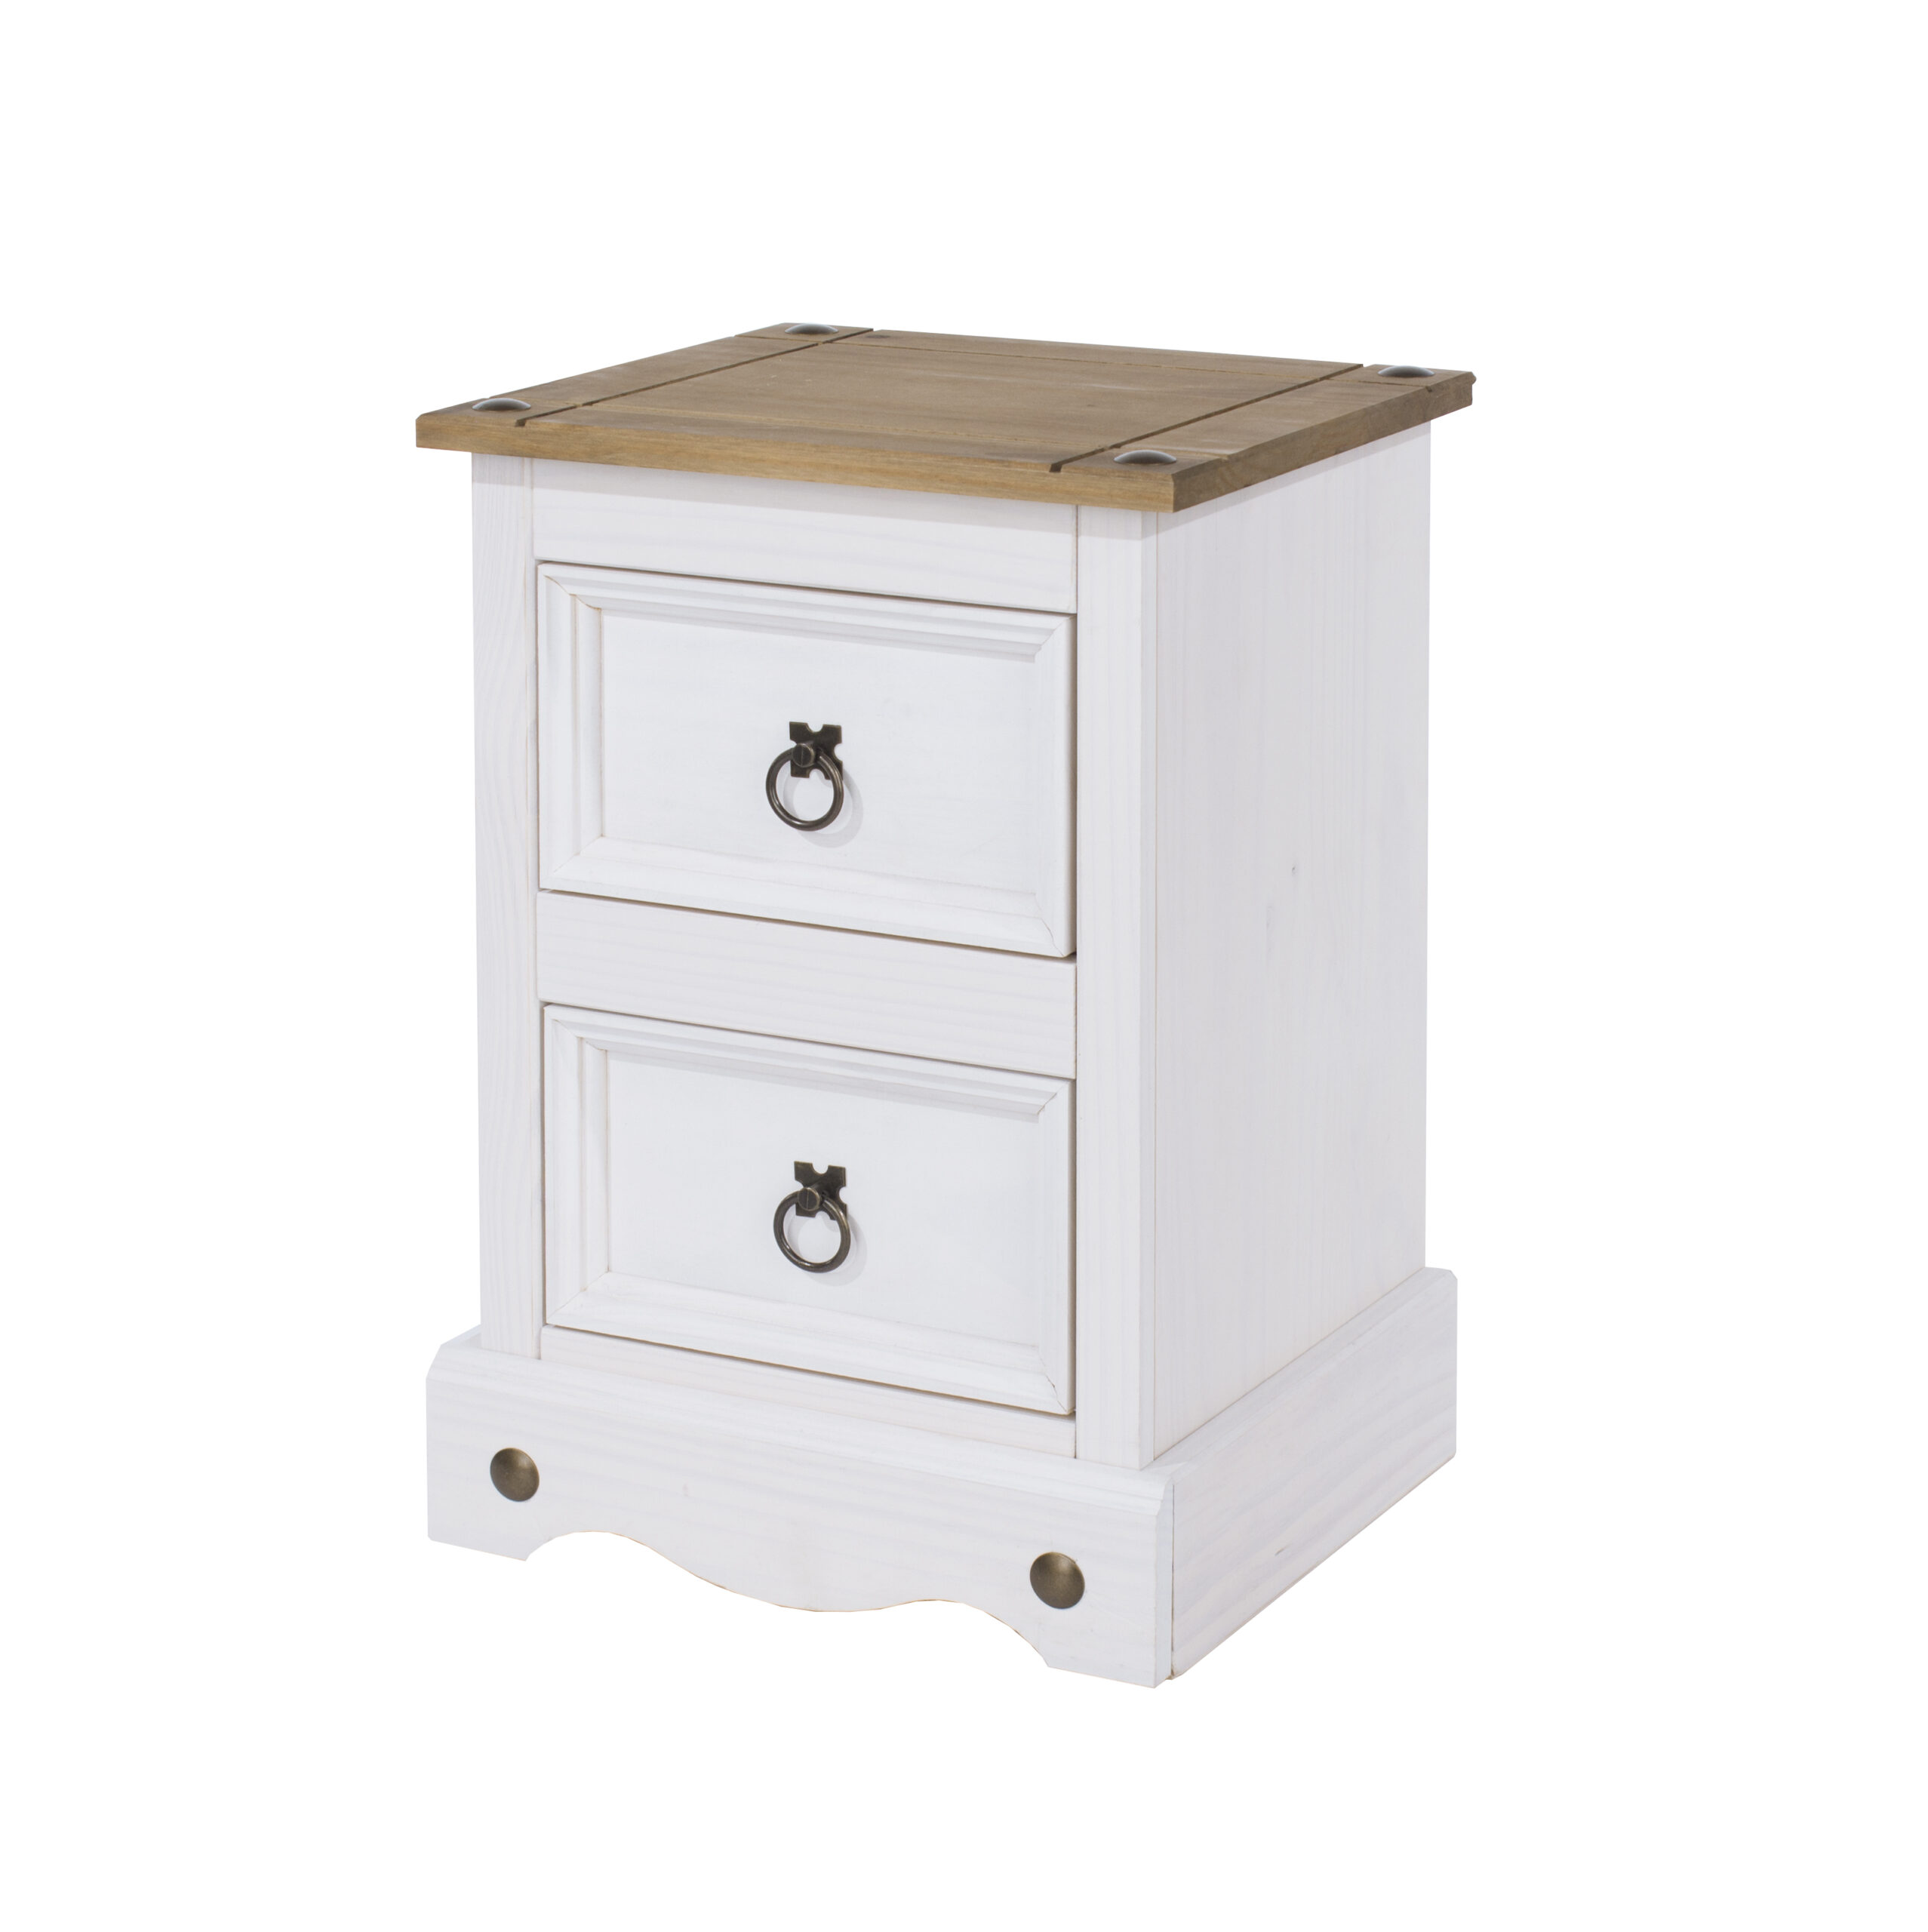 Carala Pine White 2 Drawer White Painted Bedside Table